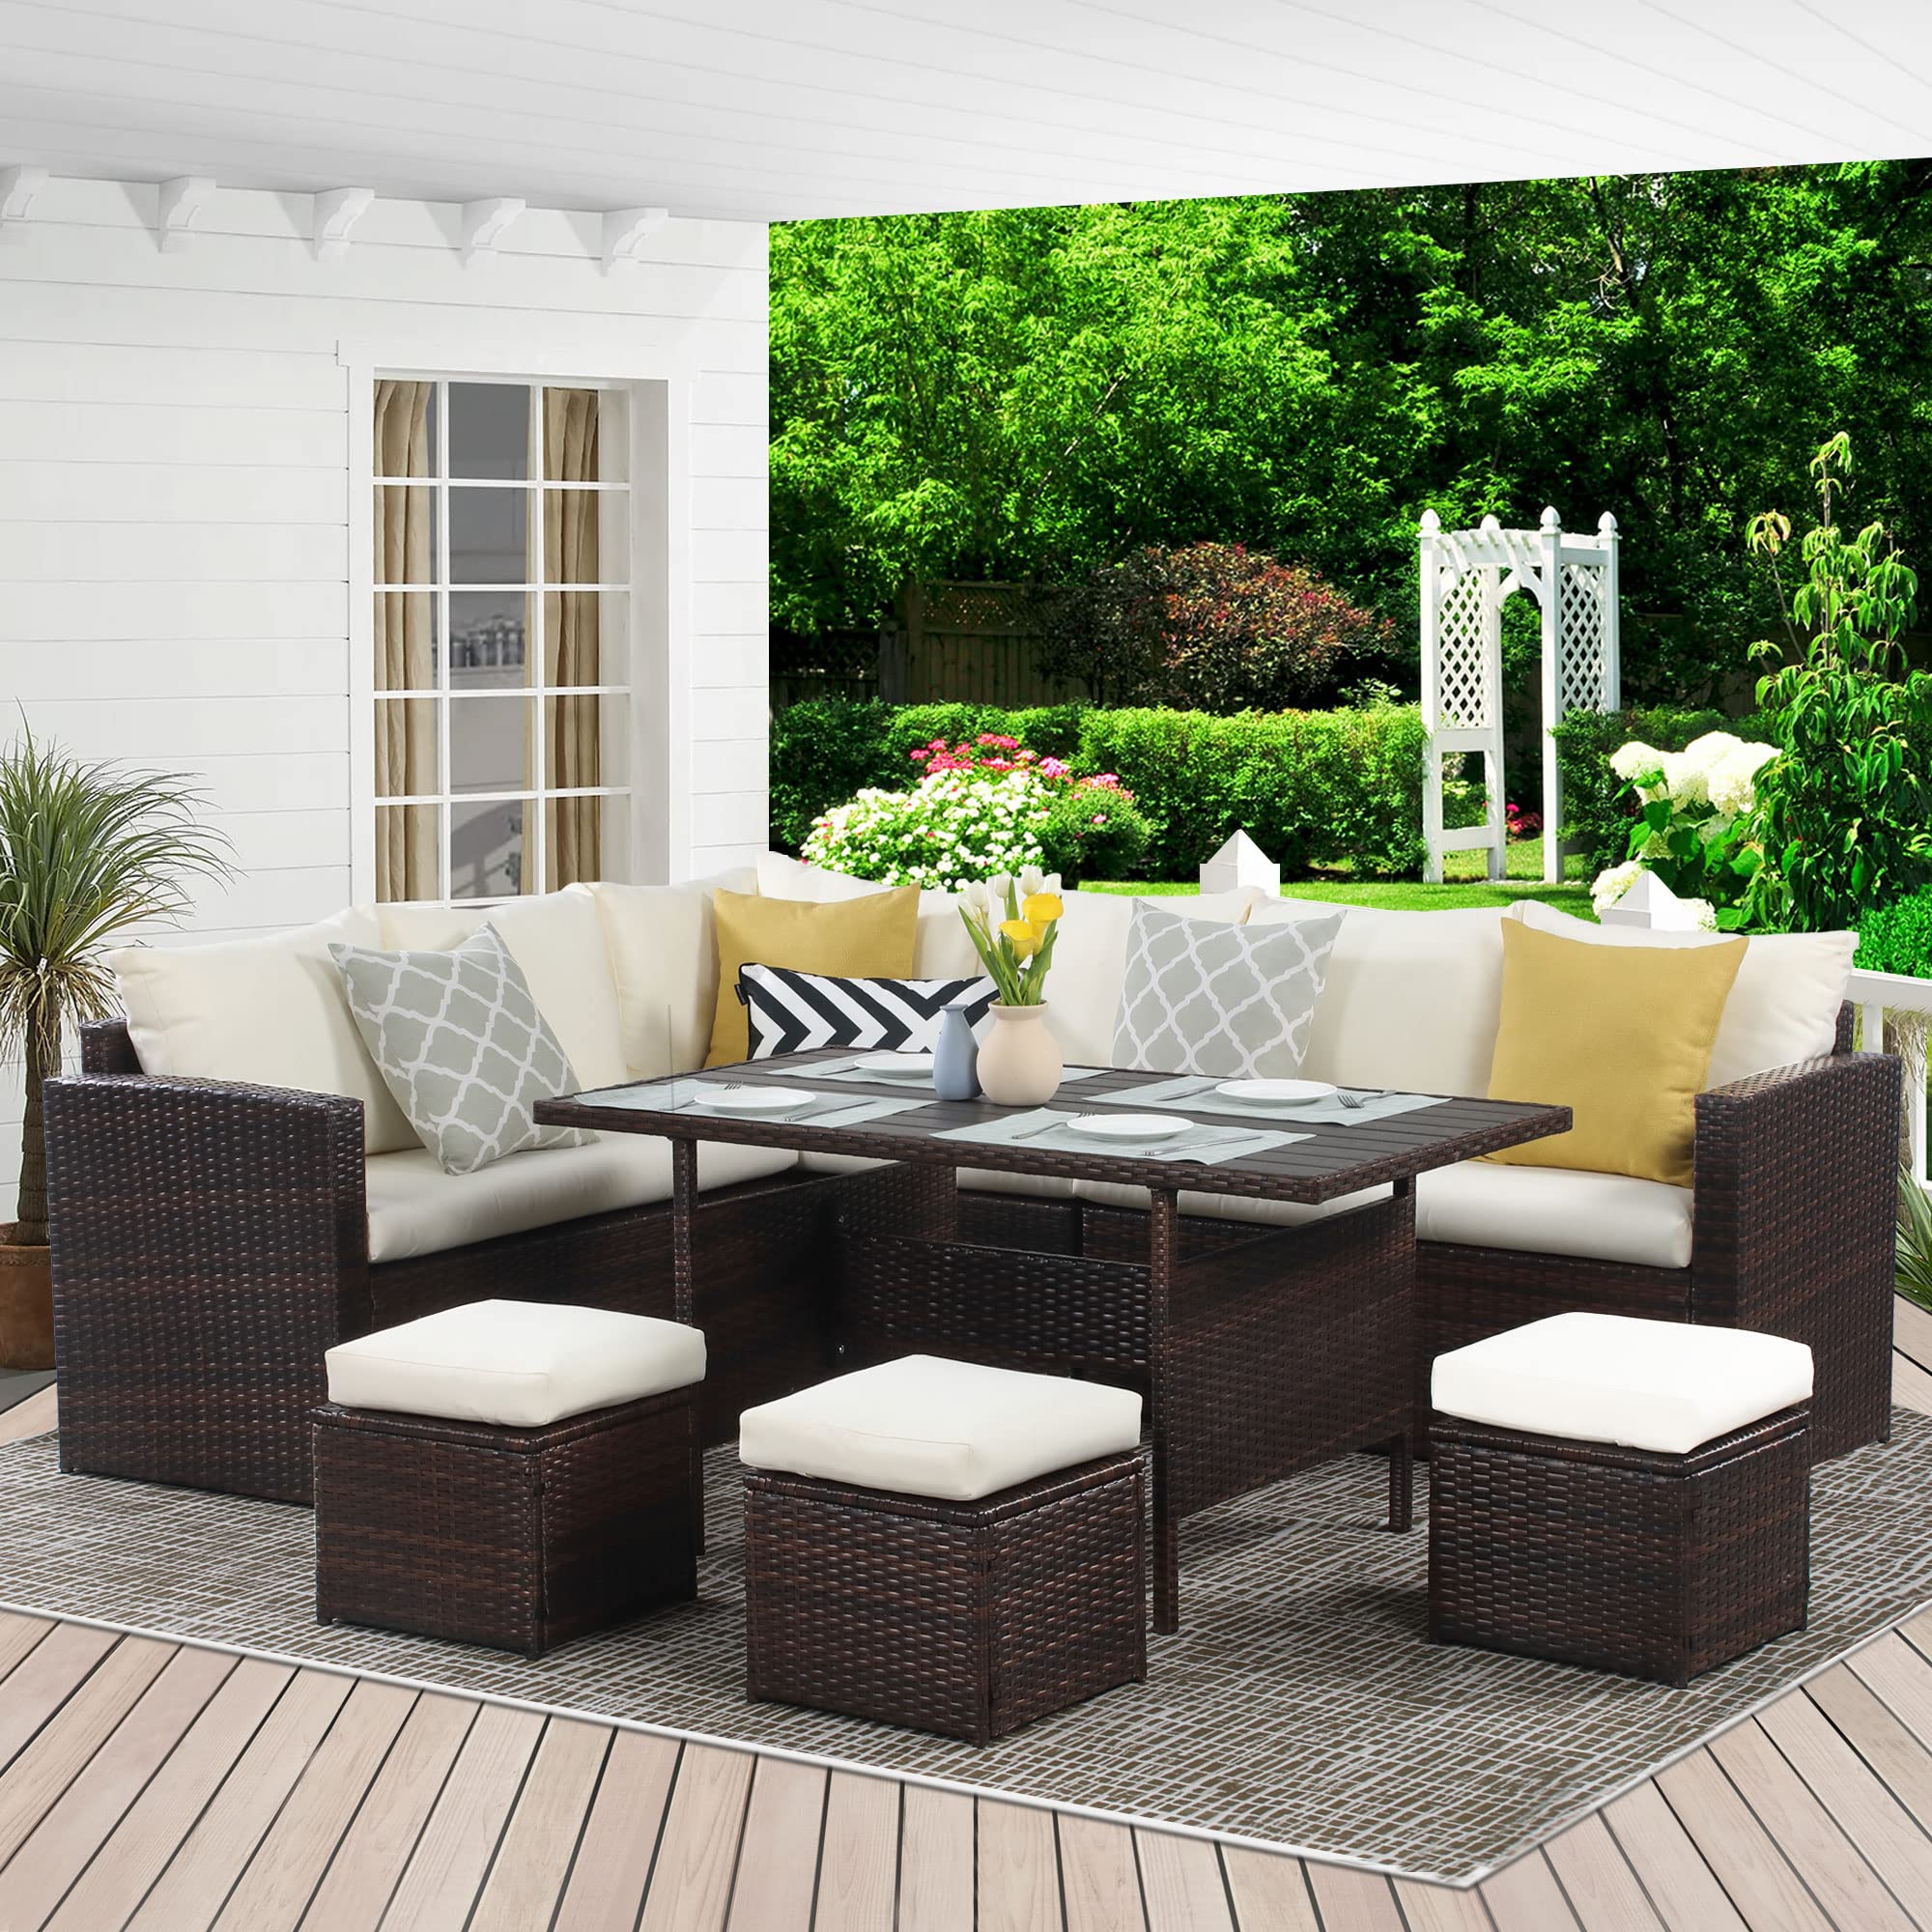 Patio Furniture Set, 7 Piece Outdoor Dining Sectional Sofa with Dining Table and Chair